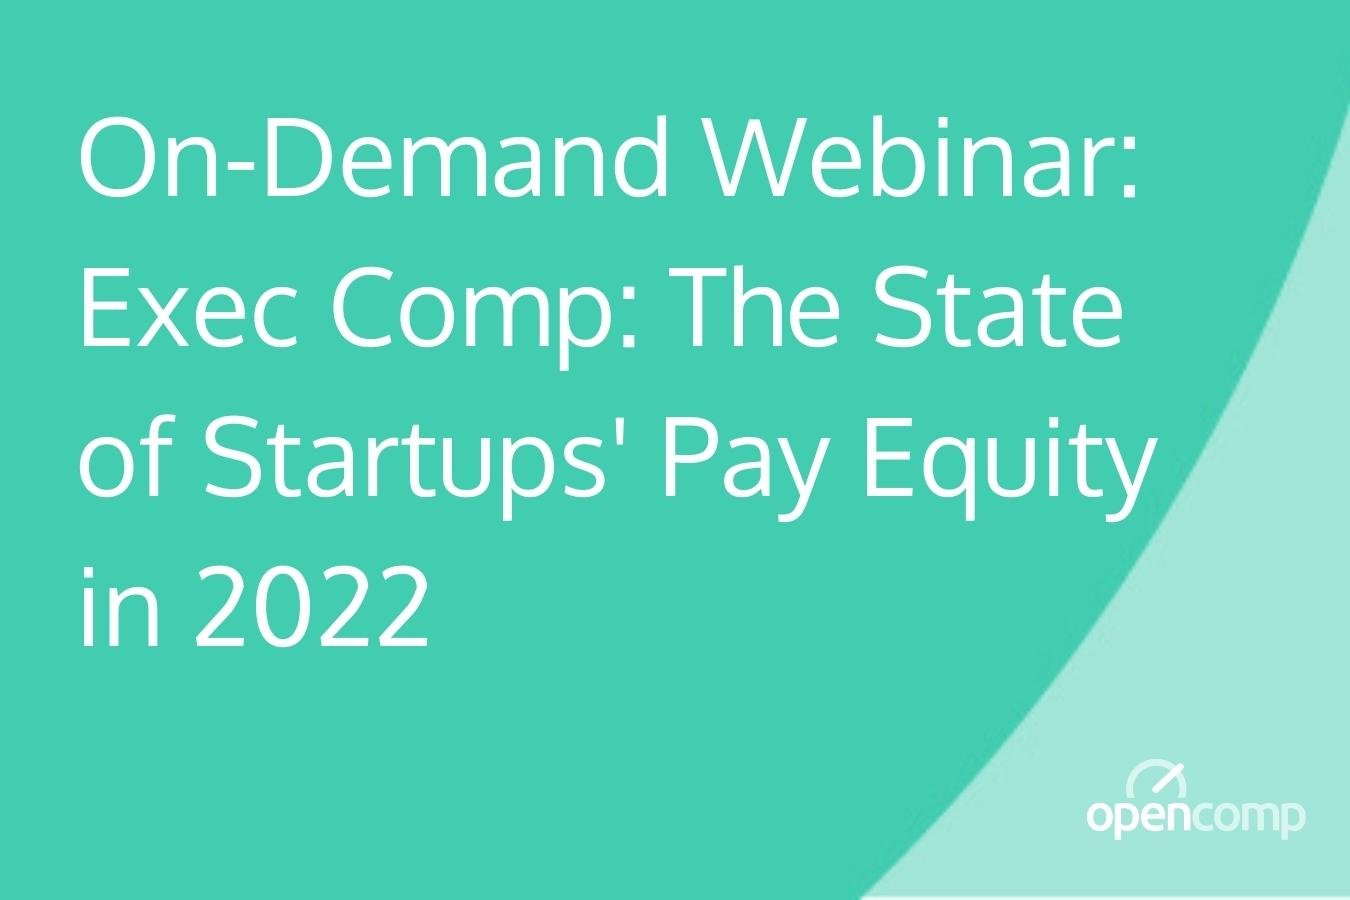 On-Demand Webinar_ The State of Startups Pay Equity in 2022